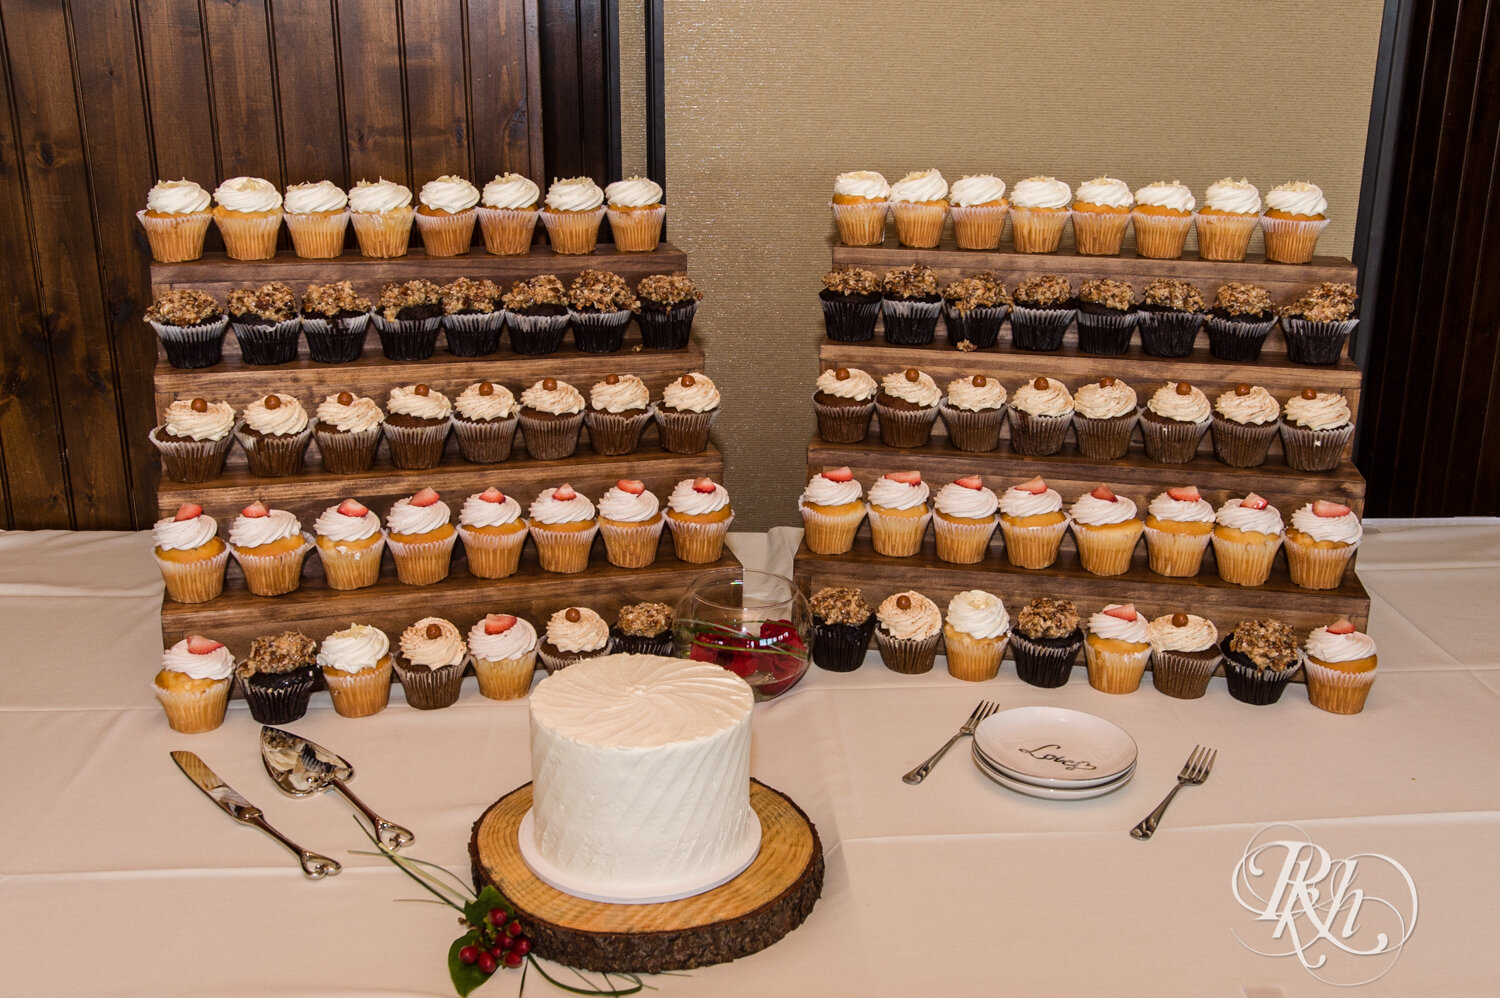 Wedding desert table with cake and cupcakes at Minnesota Horse and Hunt Club in Prior Lake, Minnesota.